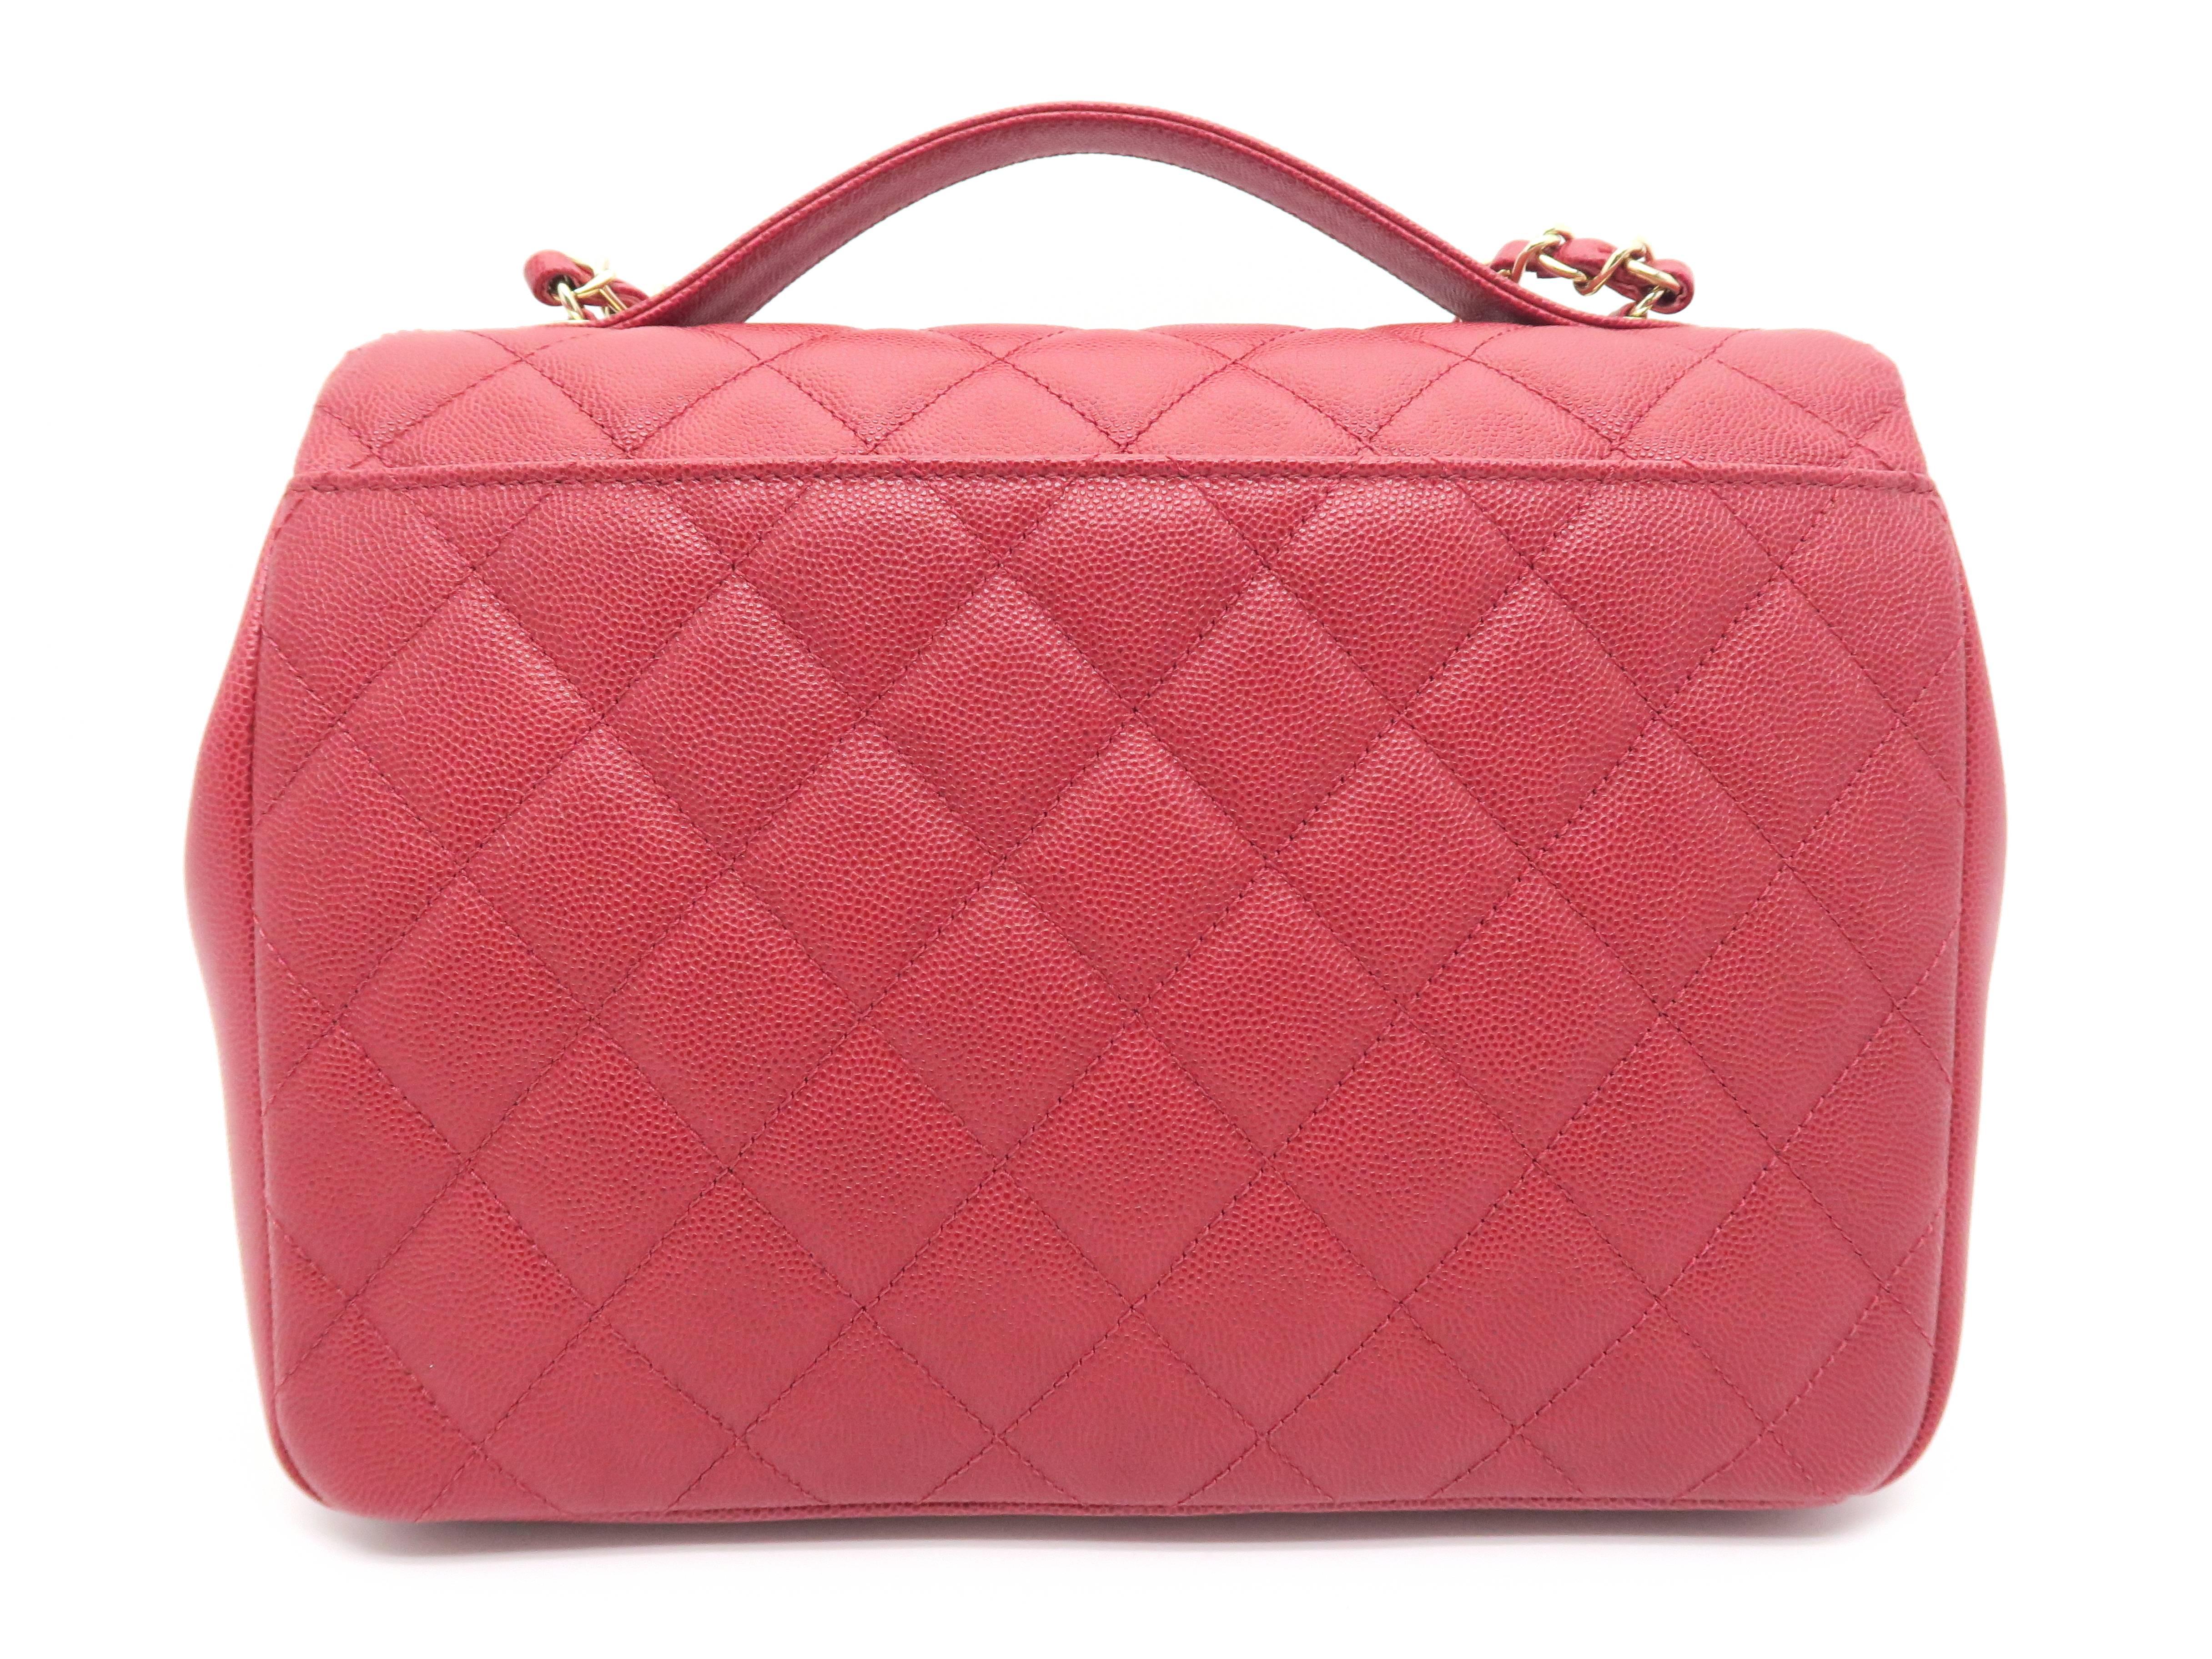 Chanel Red Quilted Caviar Leather Chain Shoulder Flap Bag In New Condition For Sale In Kowloon, HK